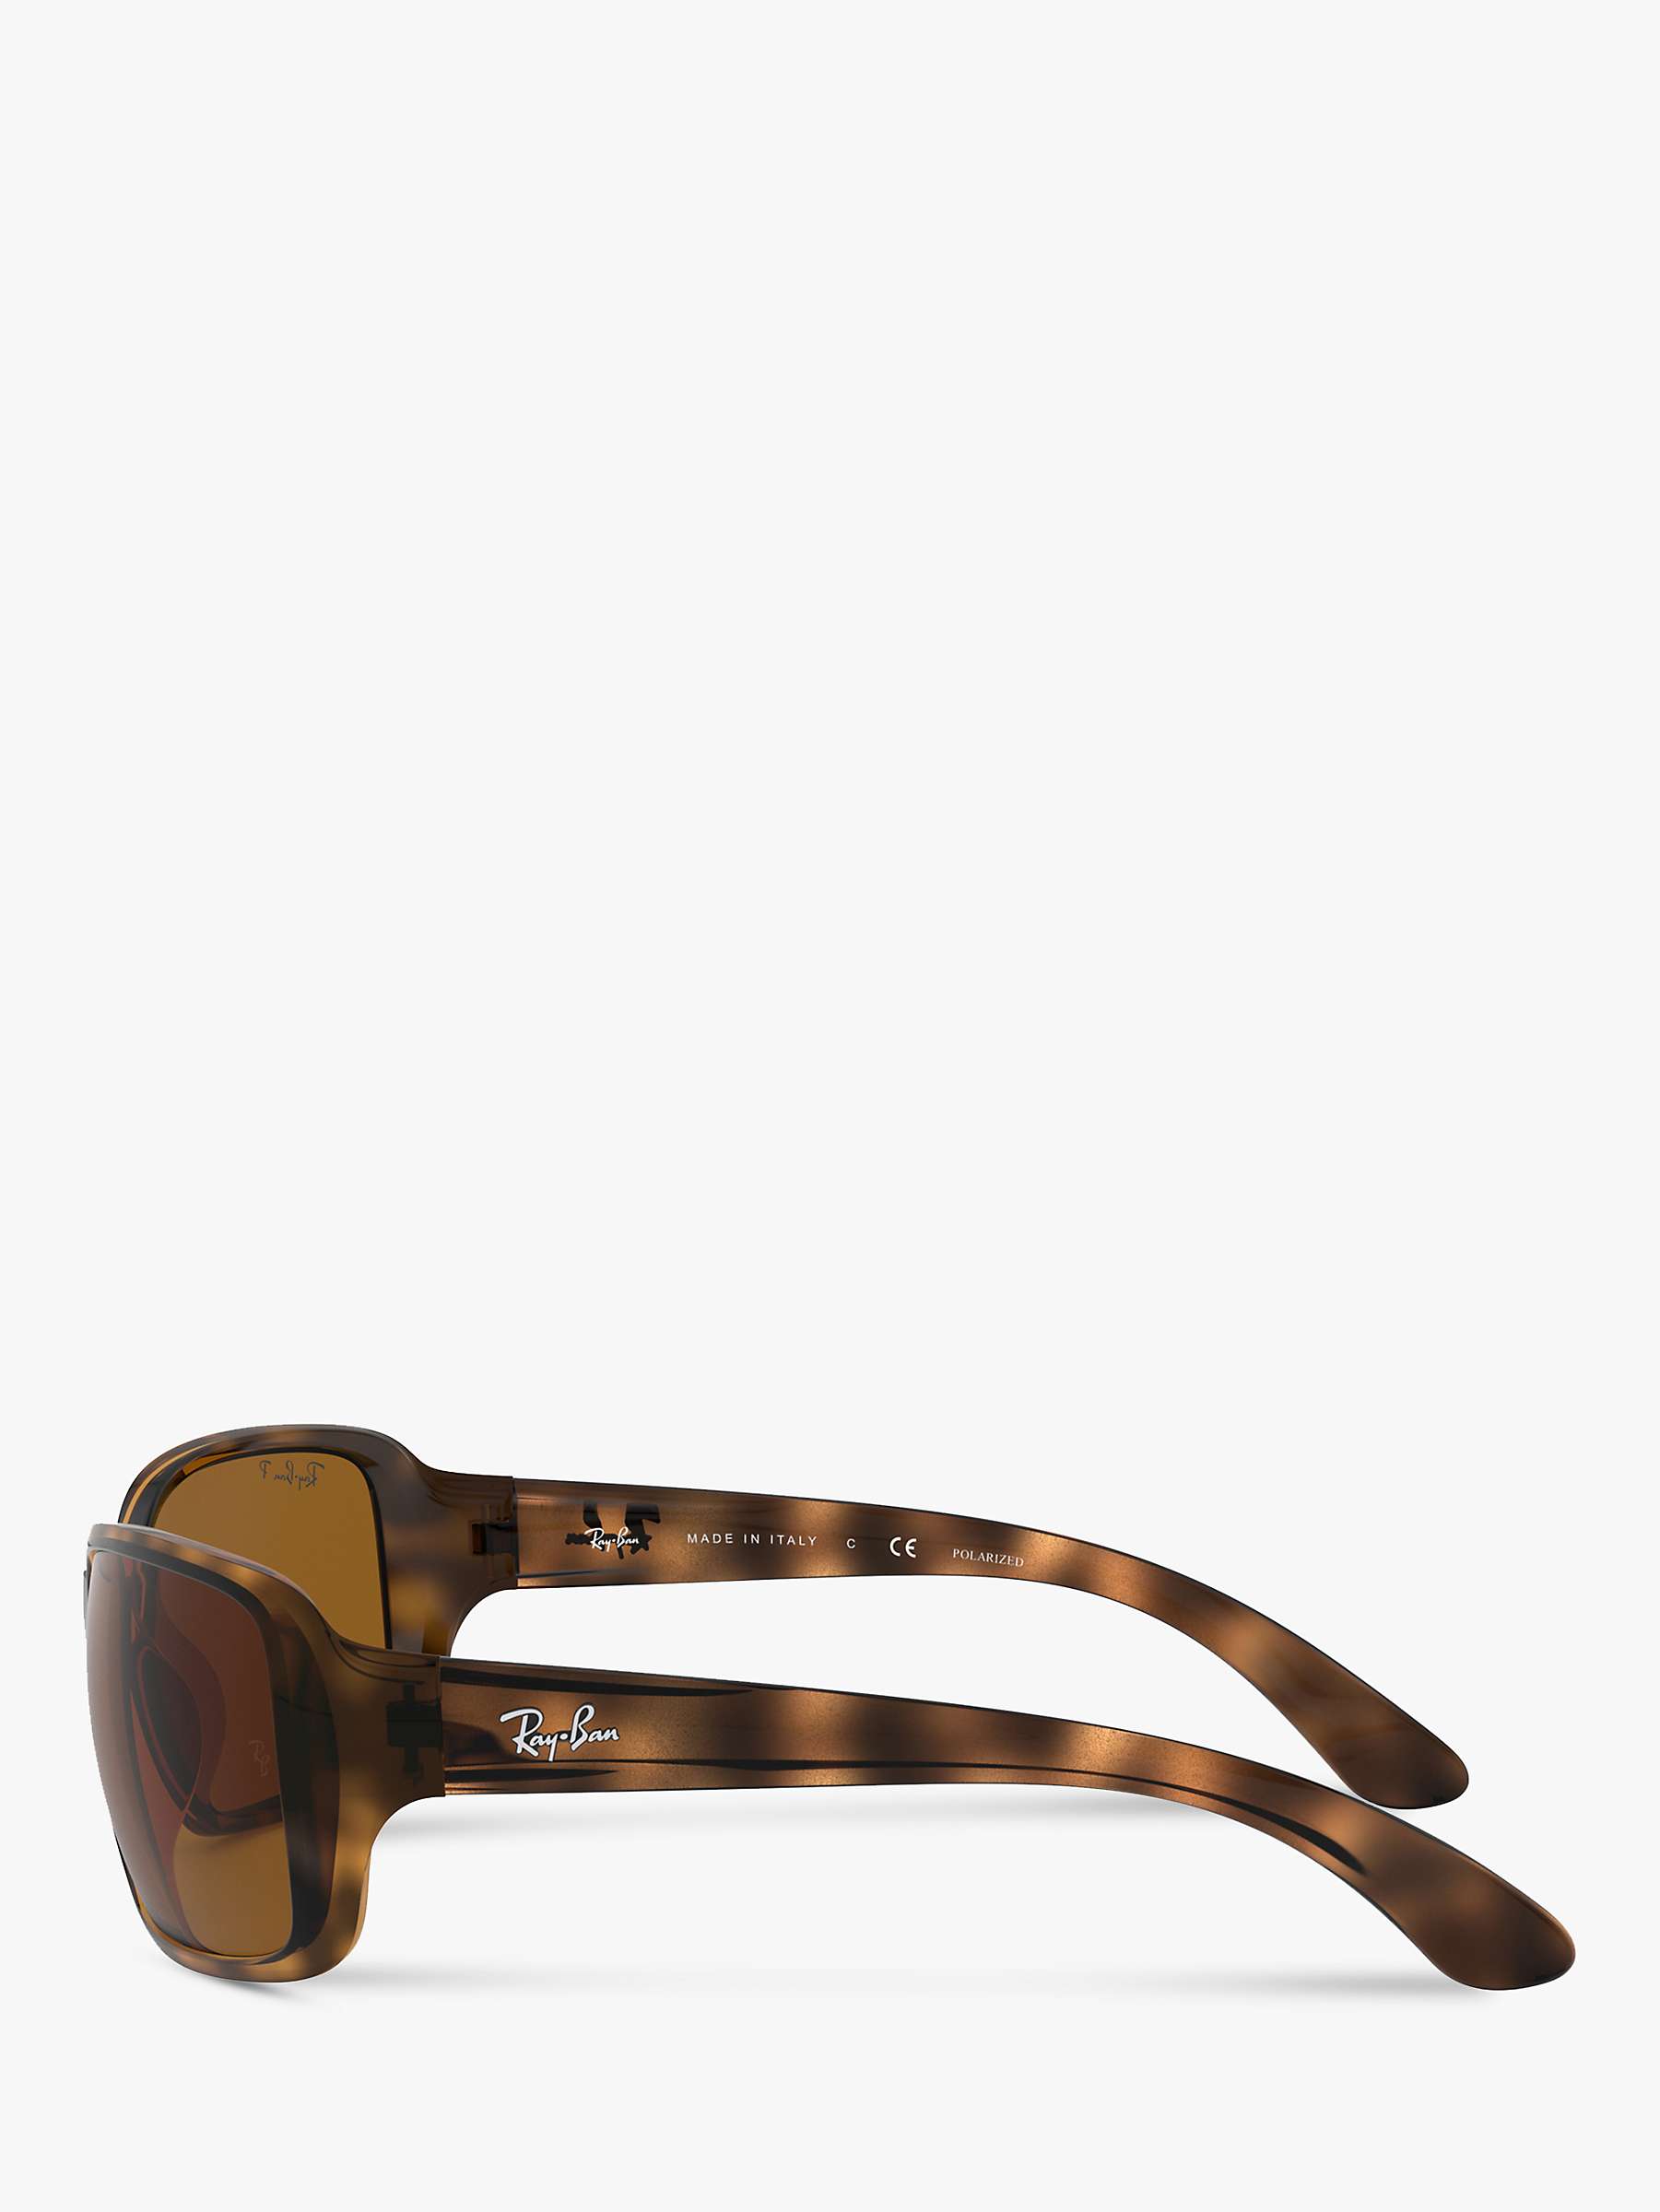 Buy Ray-Ban RB4068 Oversized Square Sunglasses, Havana Online at johnlewis.com